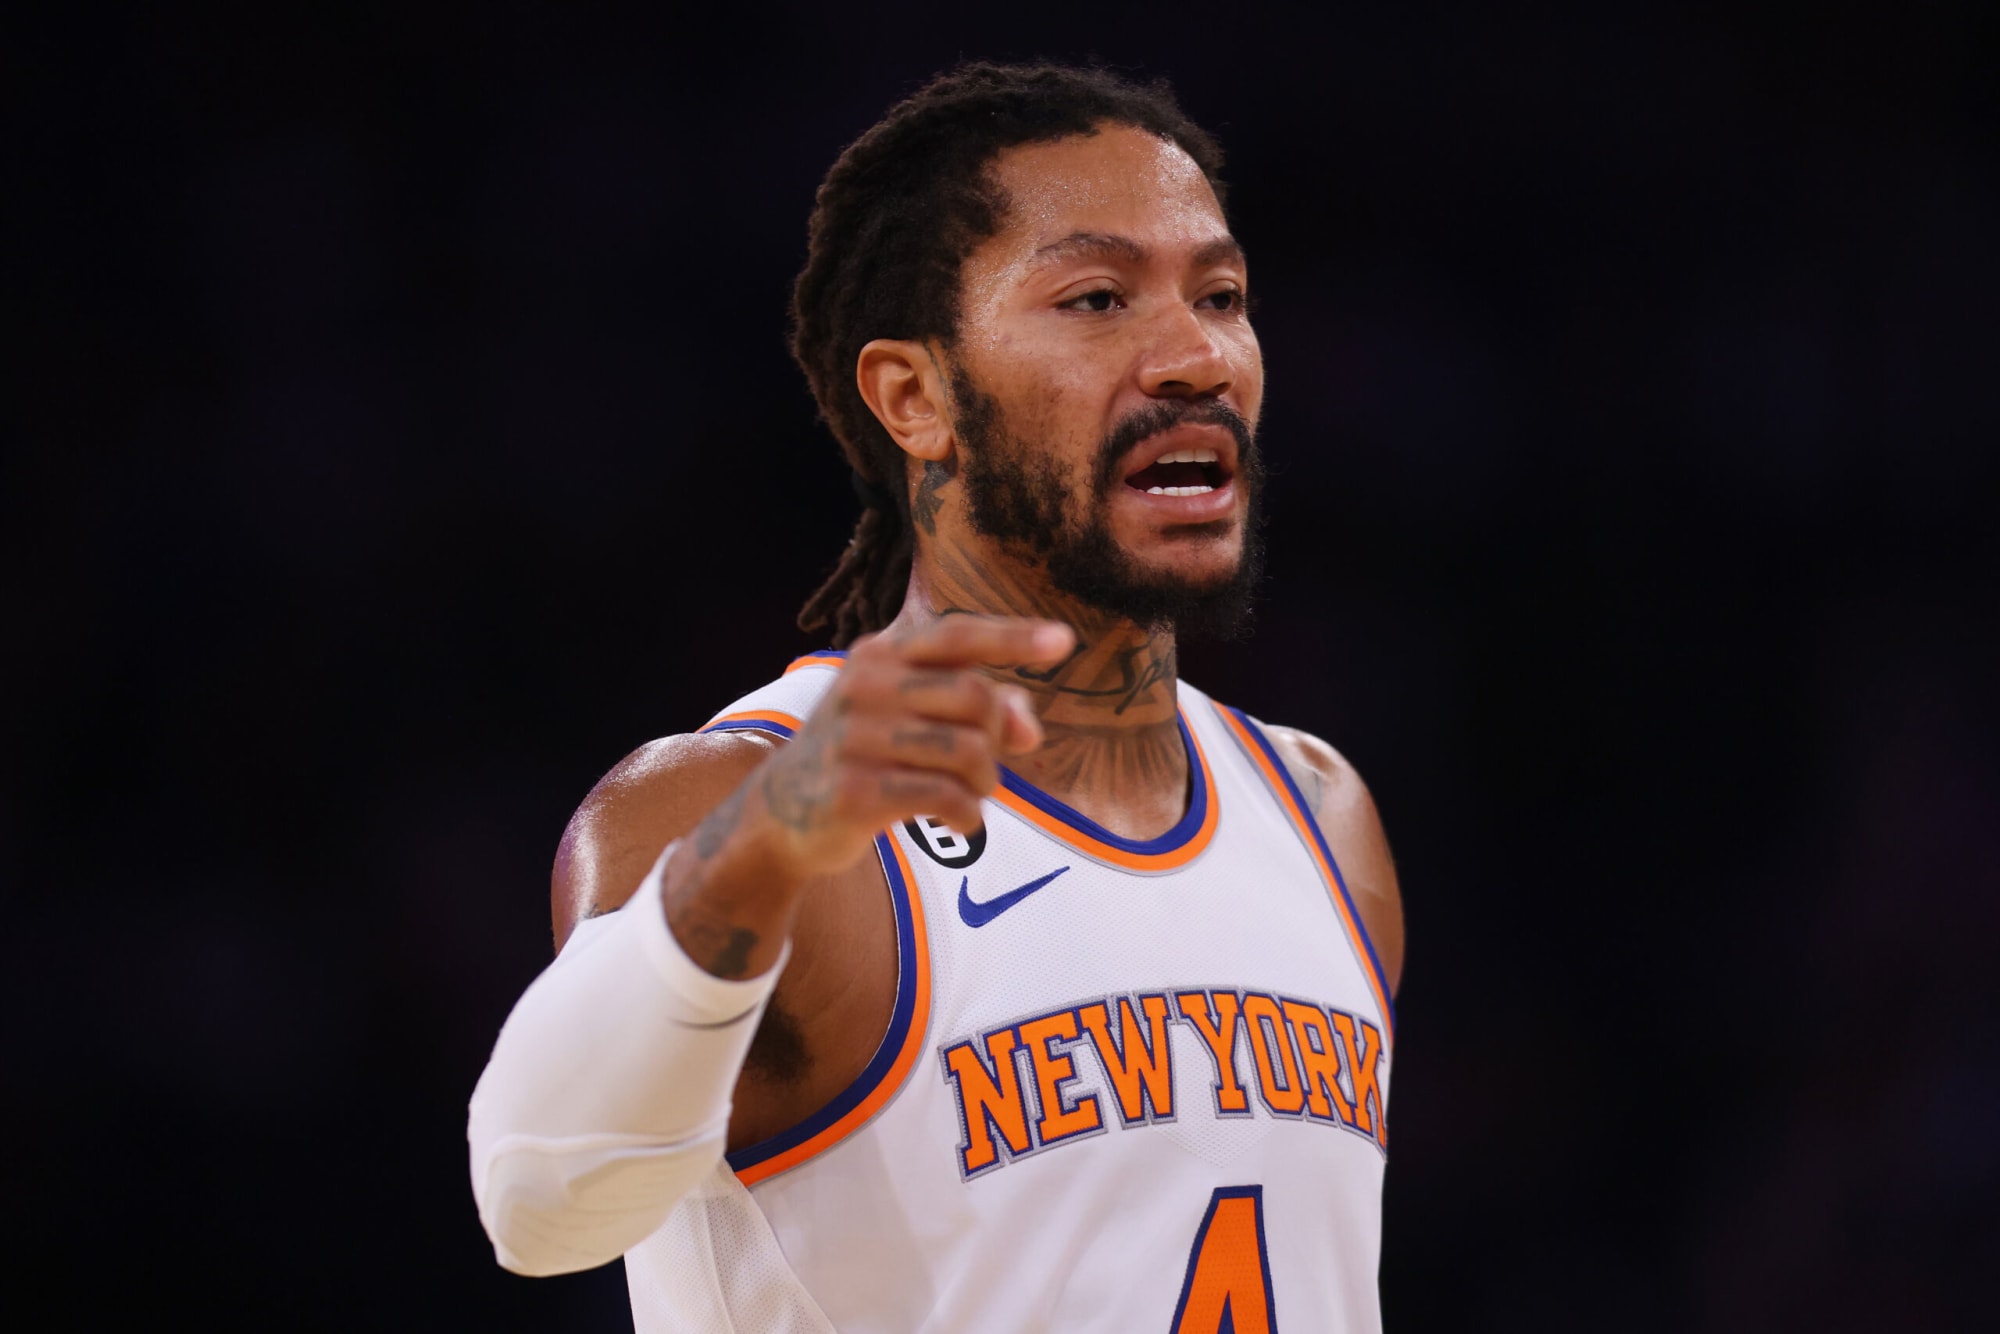 NBA insider reveals 3 teams that could sign Knicks’ Derrick Rose in free agency